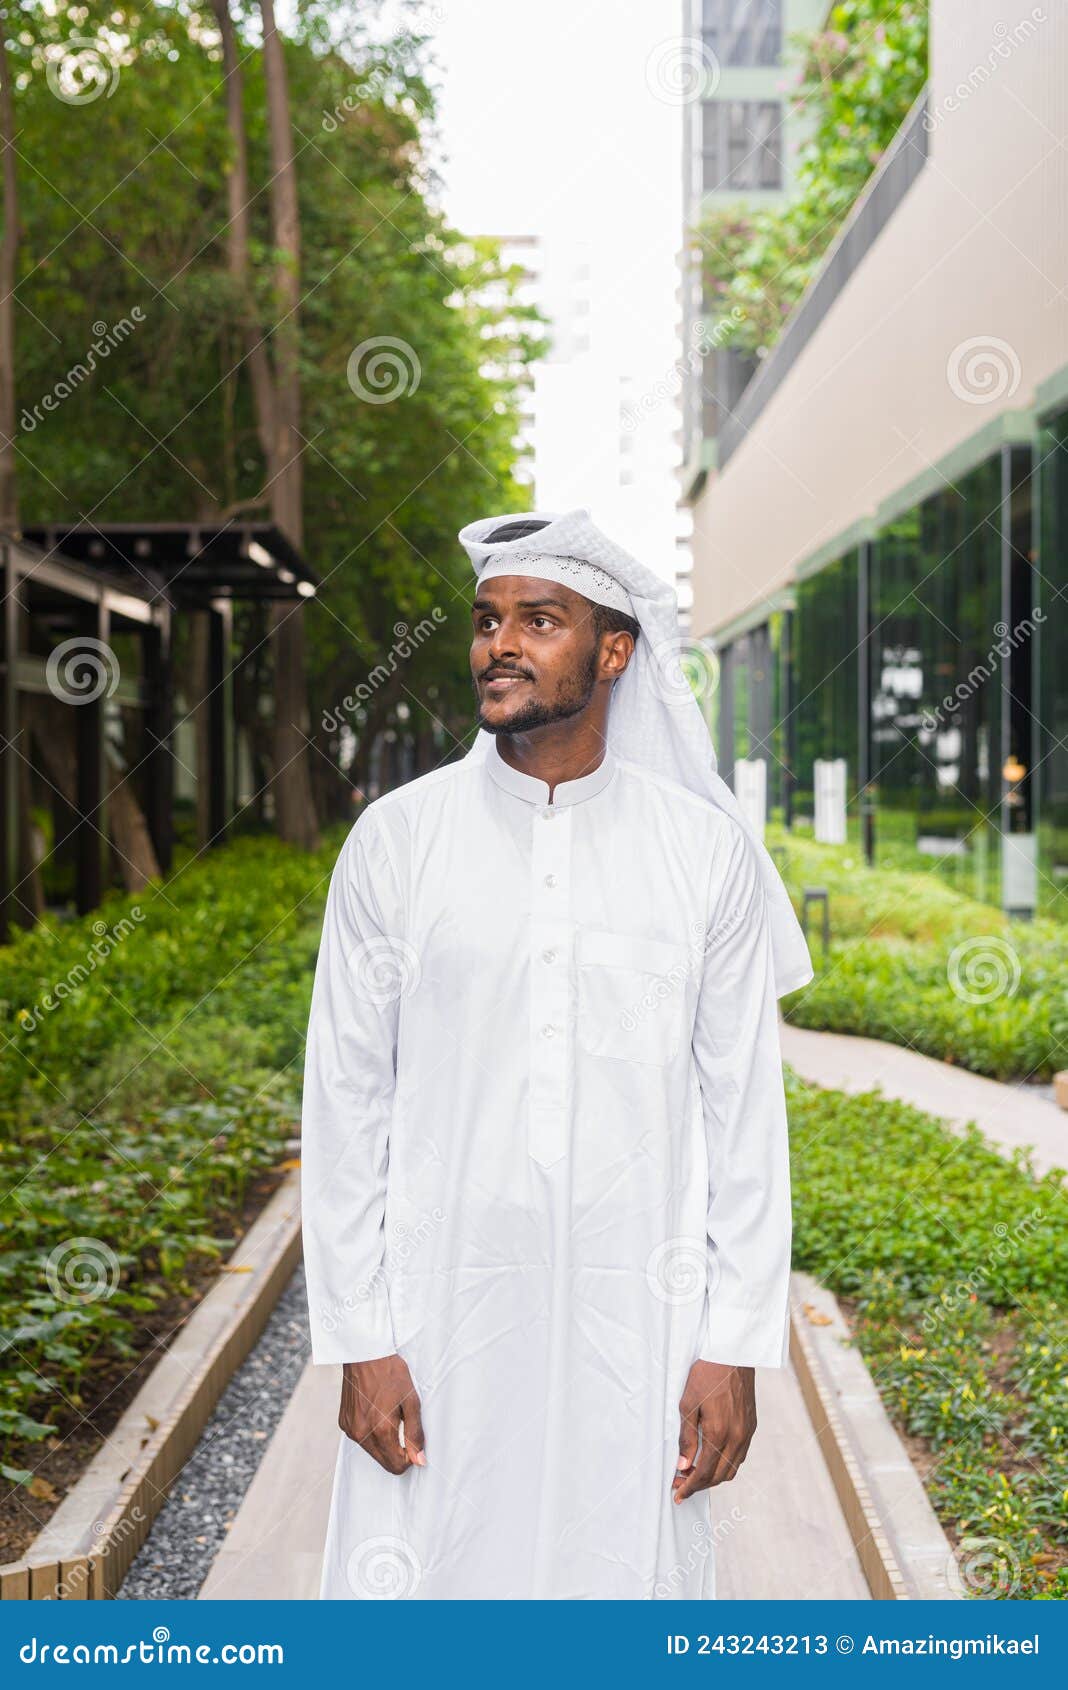 Portrait of African Muslim Man Wearing Religious Clothing an Scarf ...